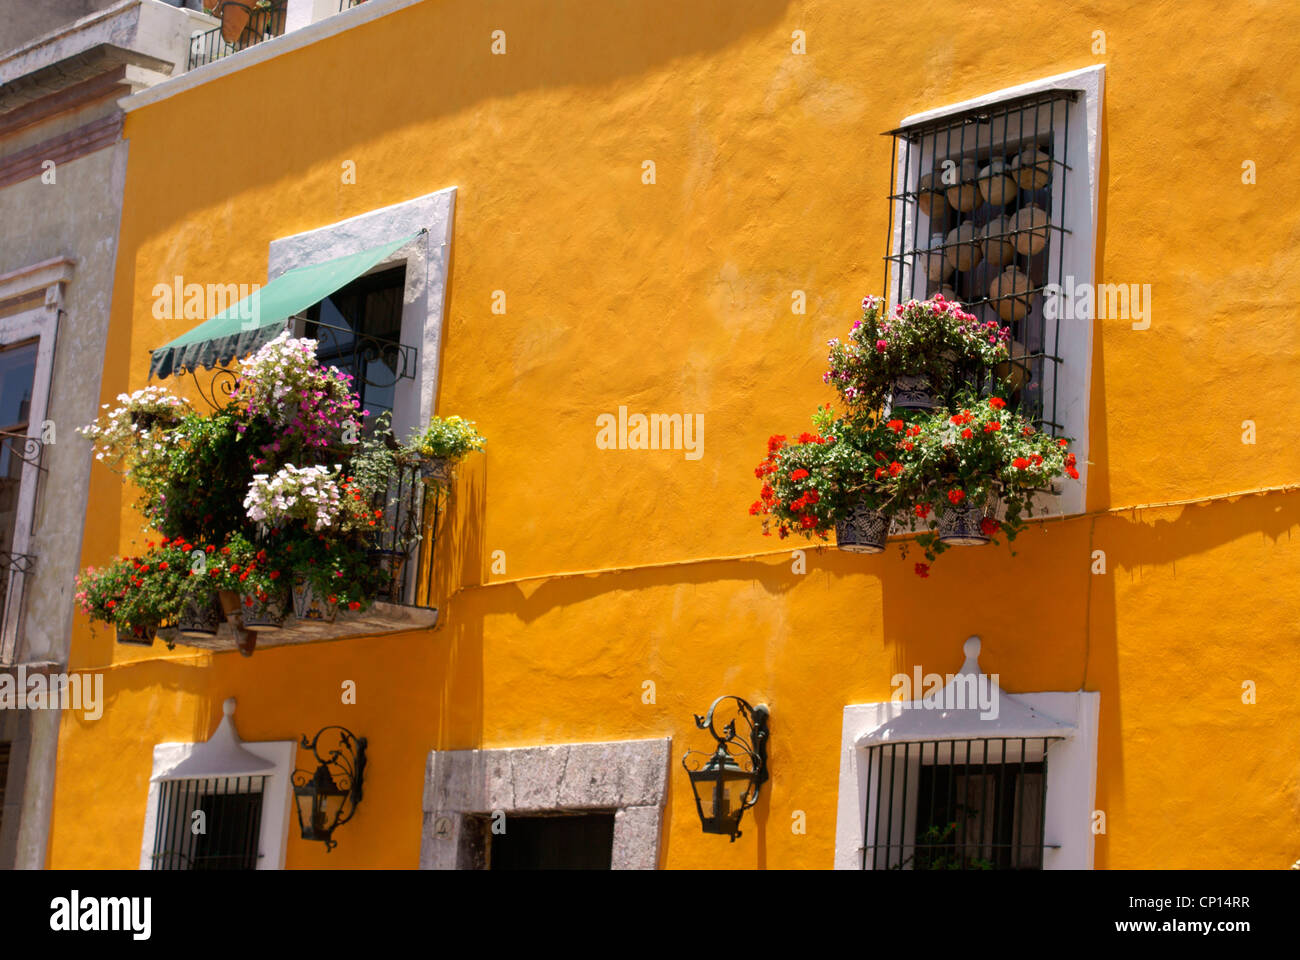 Colorful flowers decorating the windows of a restored Spanis colonial house in the city of Puebla, Mexico. Stock Photo